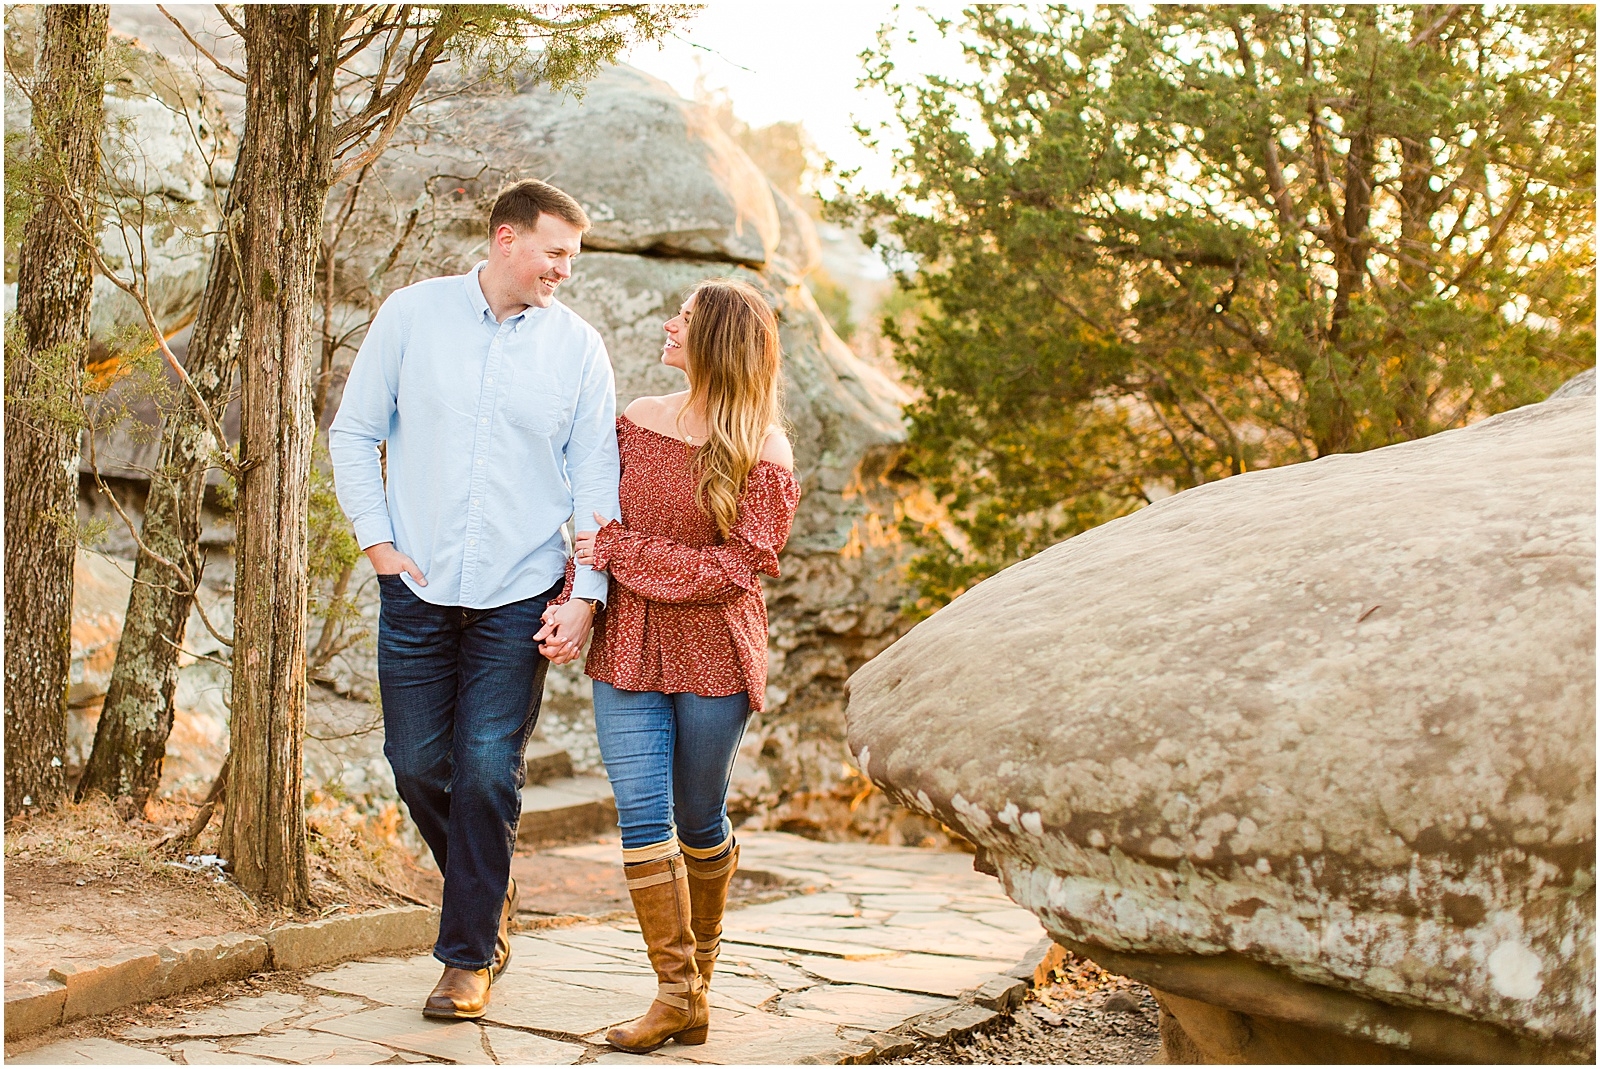 A Sunny Garden of the Gods Engagement Session | Shiloh and Lee | Bret and Brandie Photography081.jpg